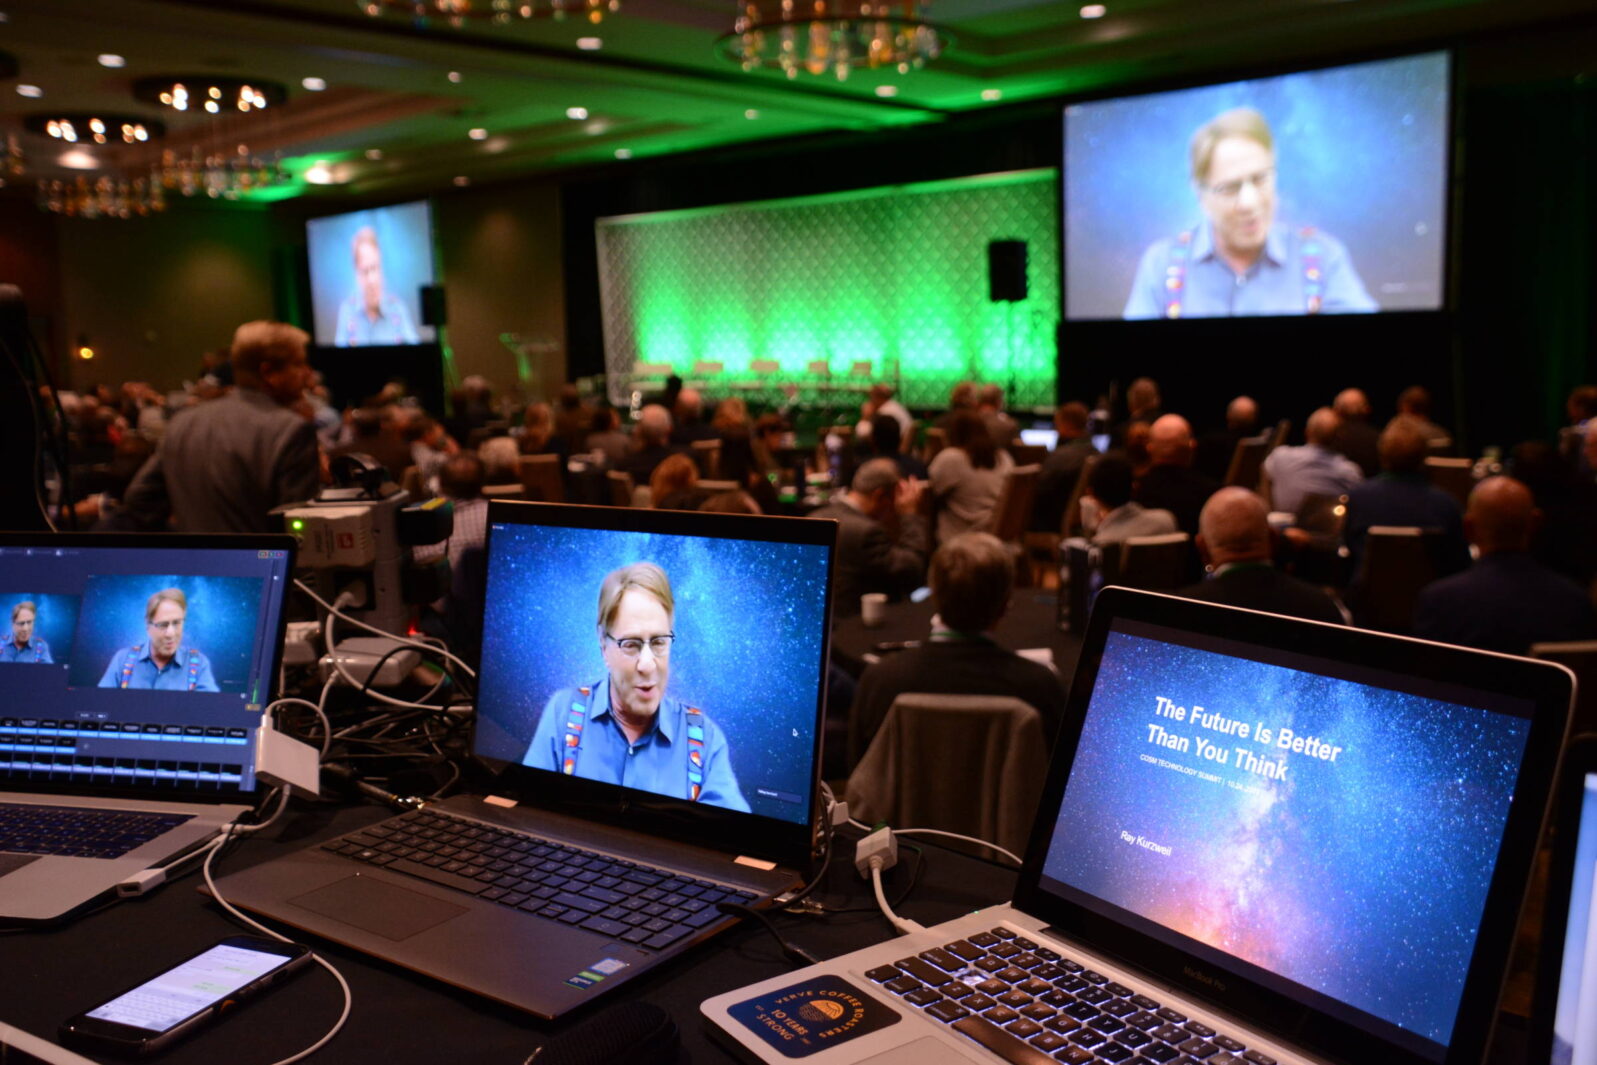 Ray Kurzweil presenting via teleconference at COSM 2019